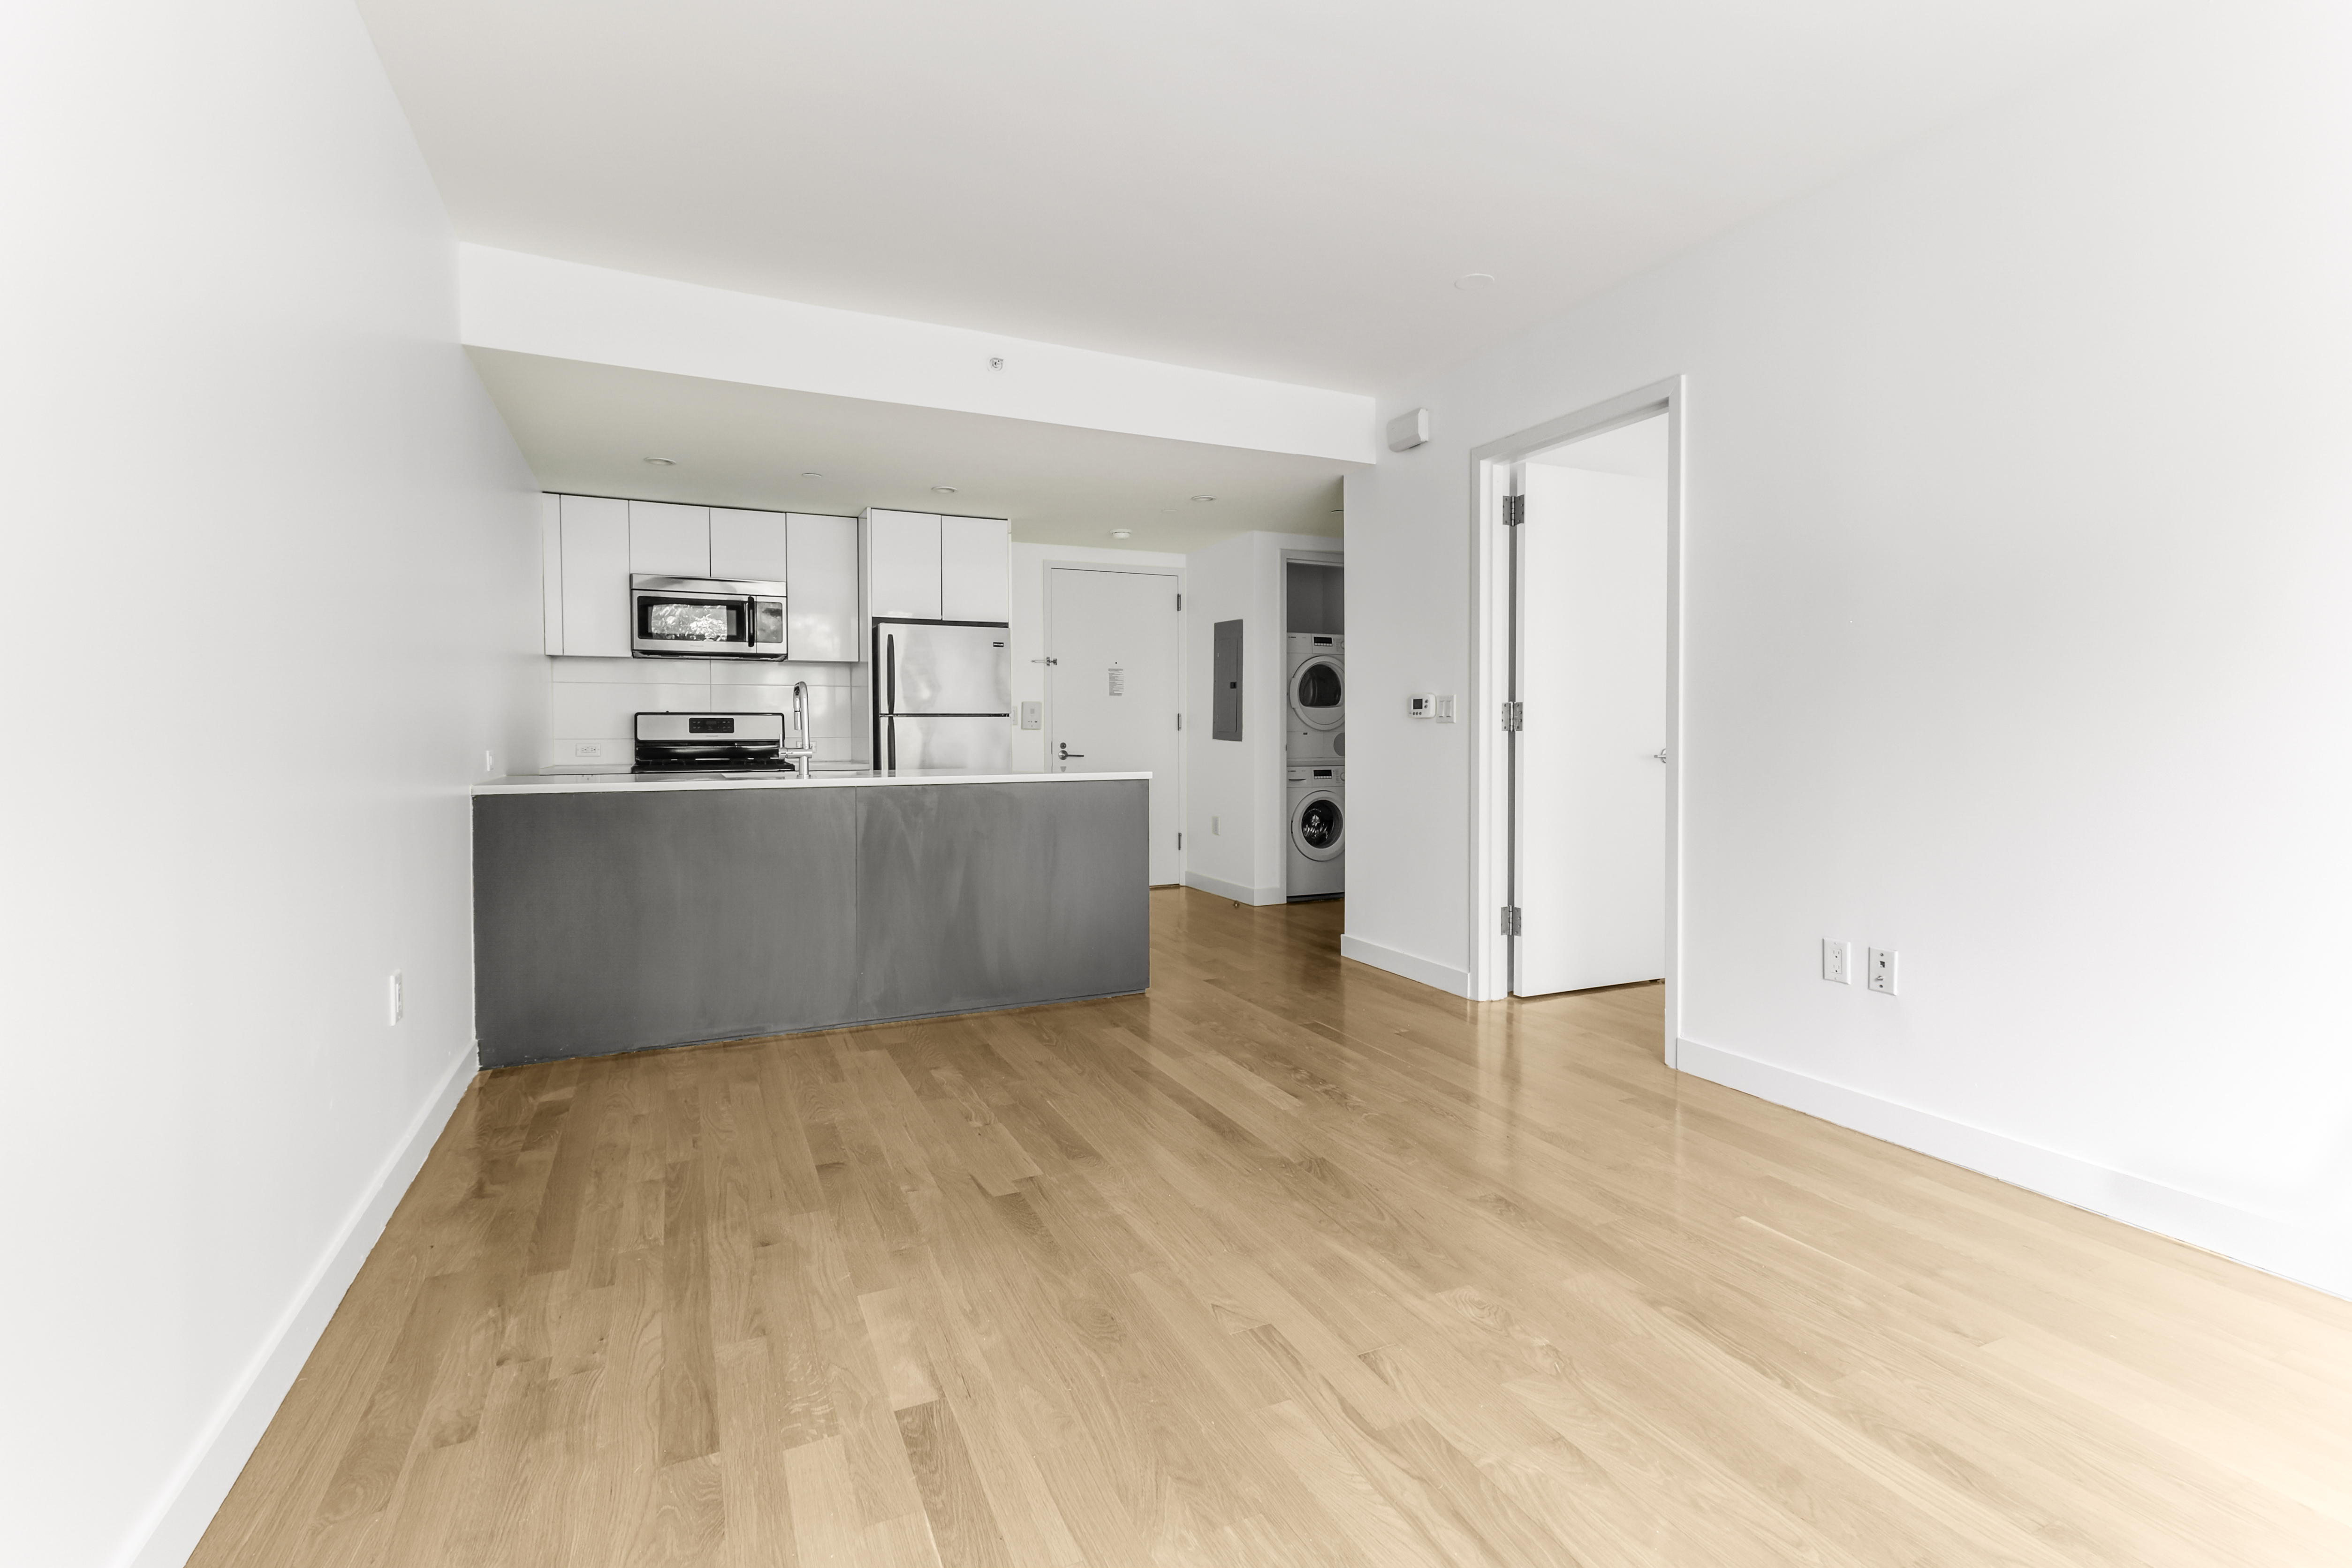 a view of kitchen and empty room with wooden floor